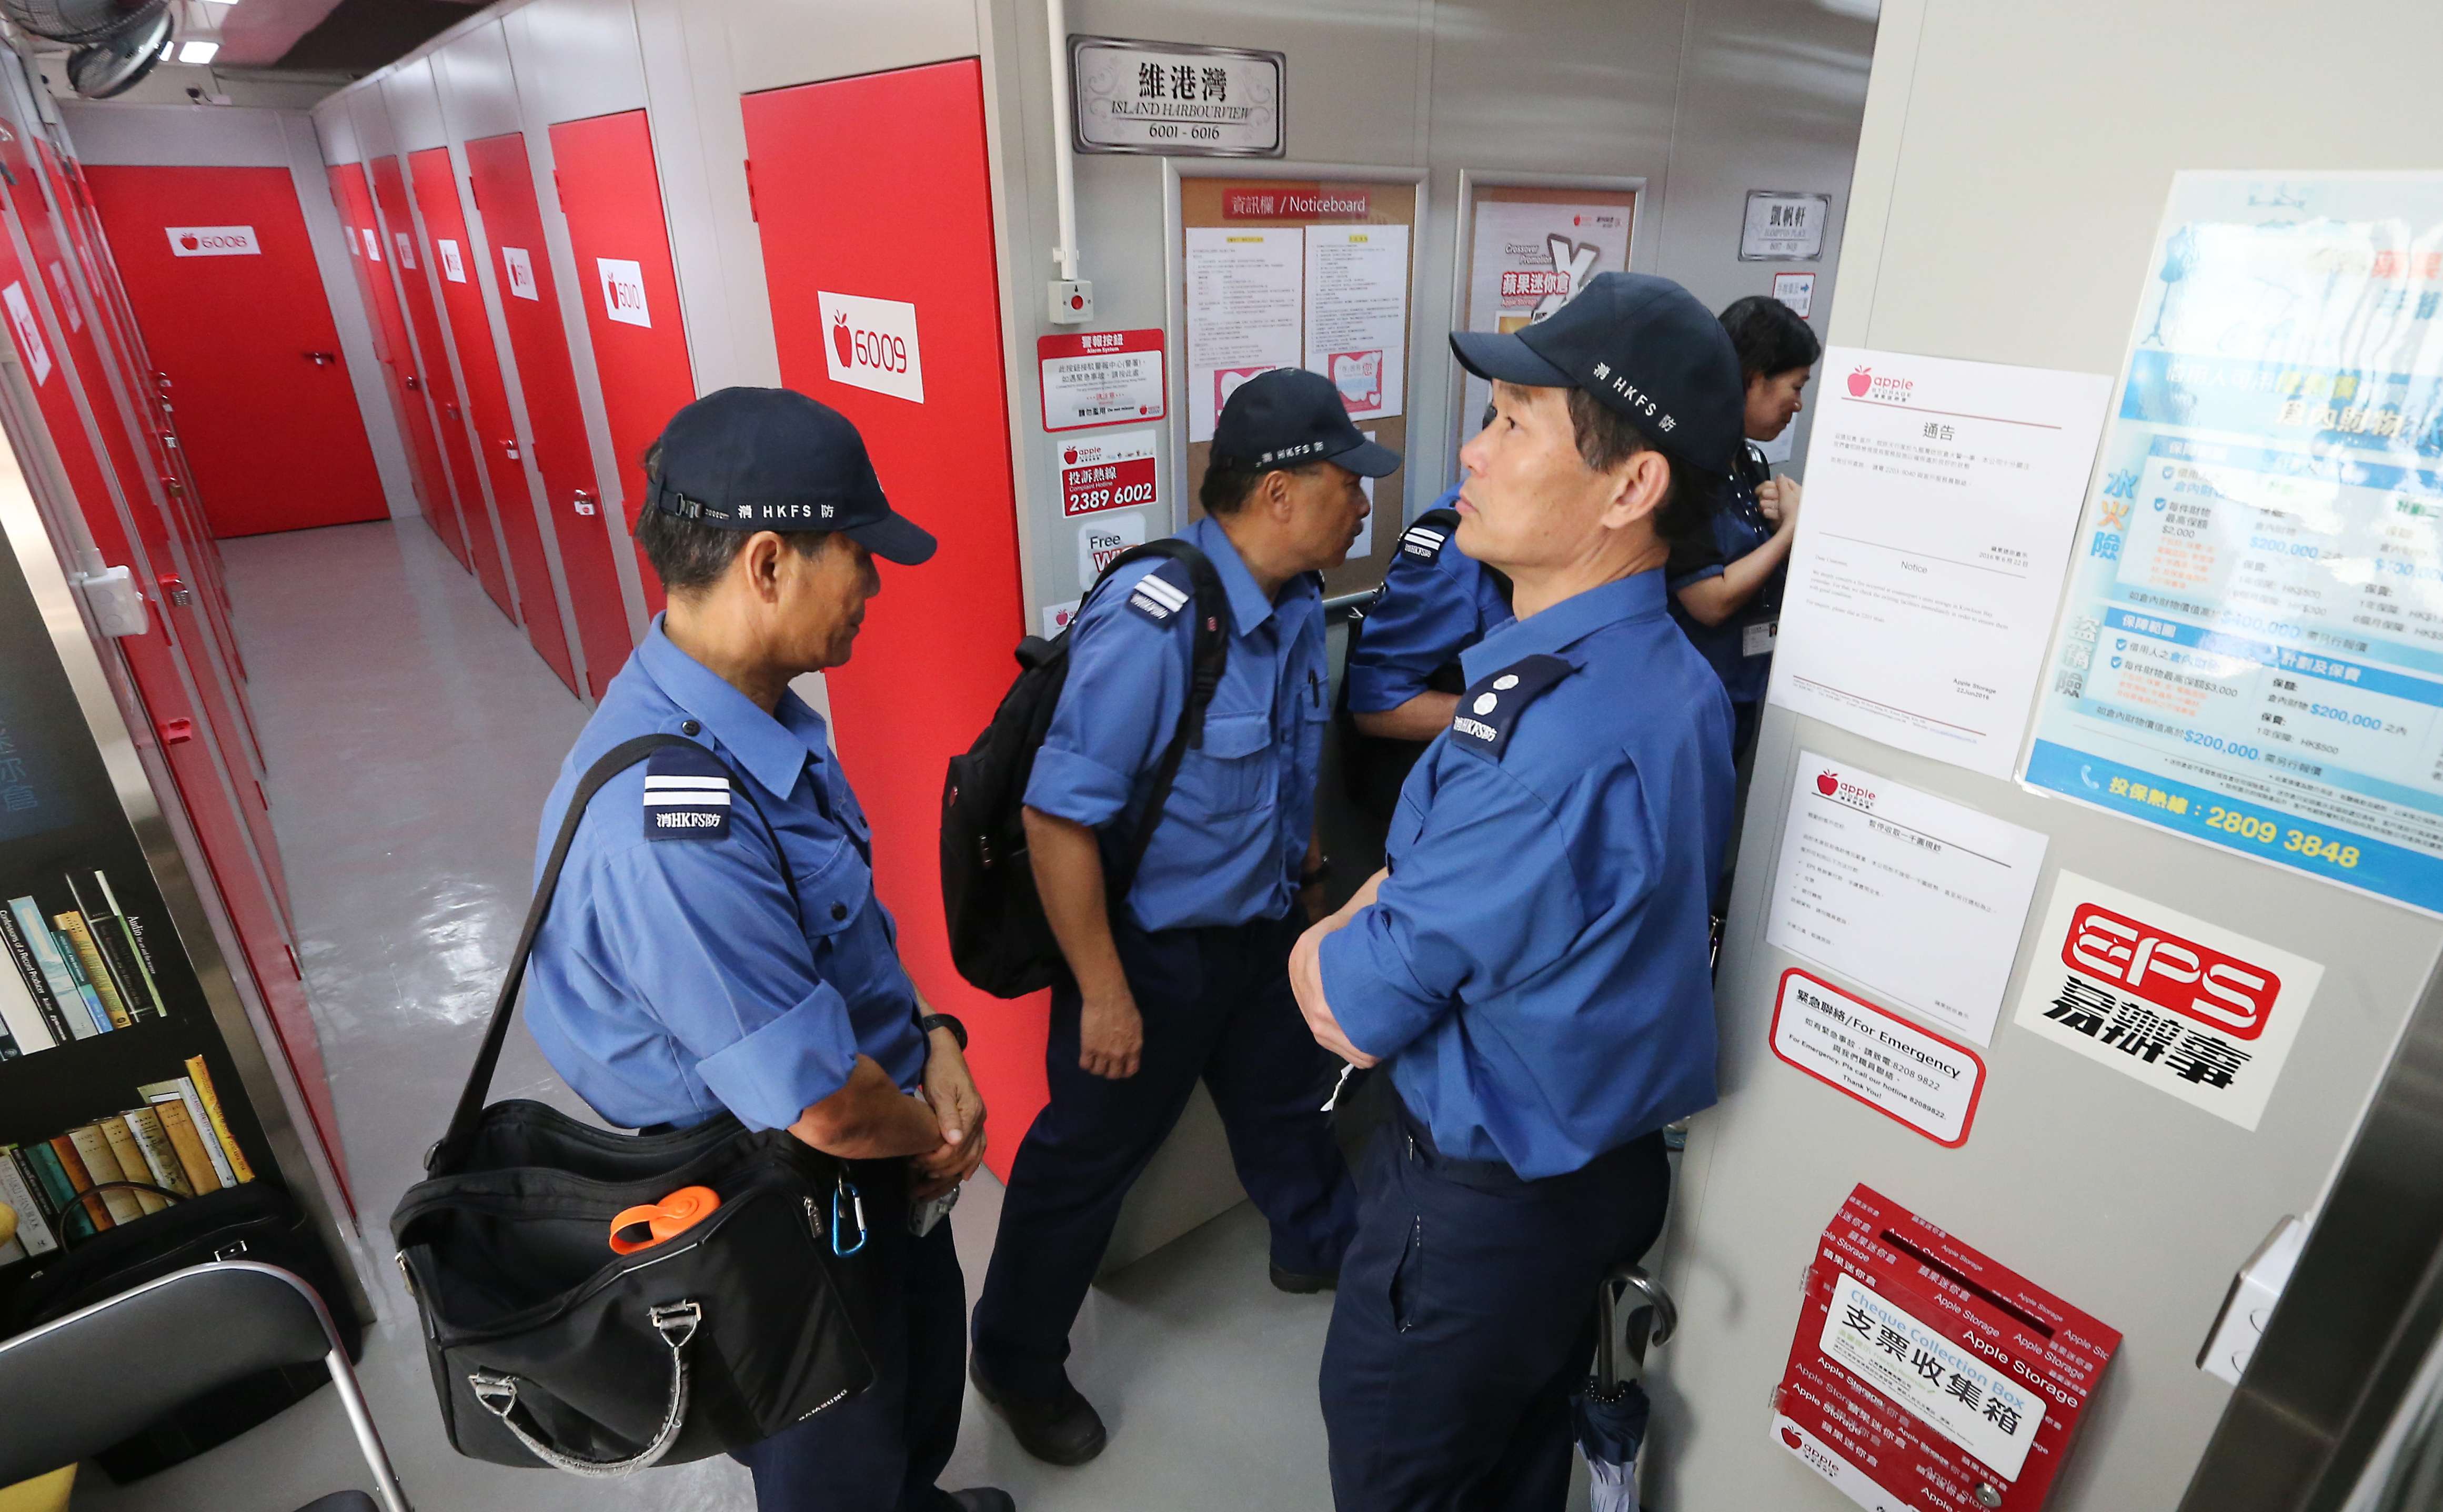 Firemen check fire protection system at a storage facility in Tai Kok Tsui. Photo: Felix Wong